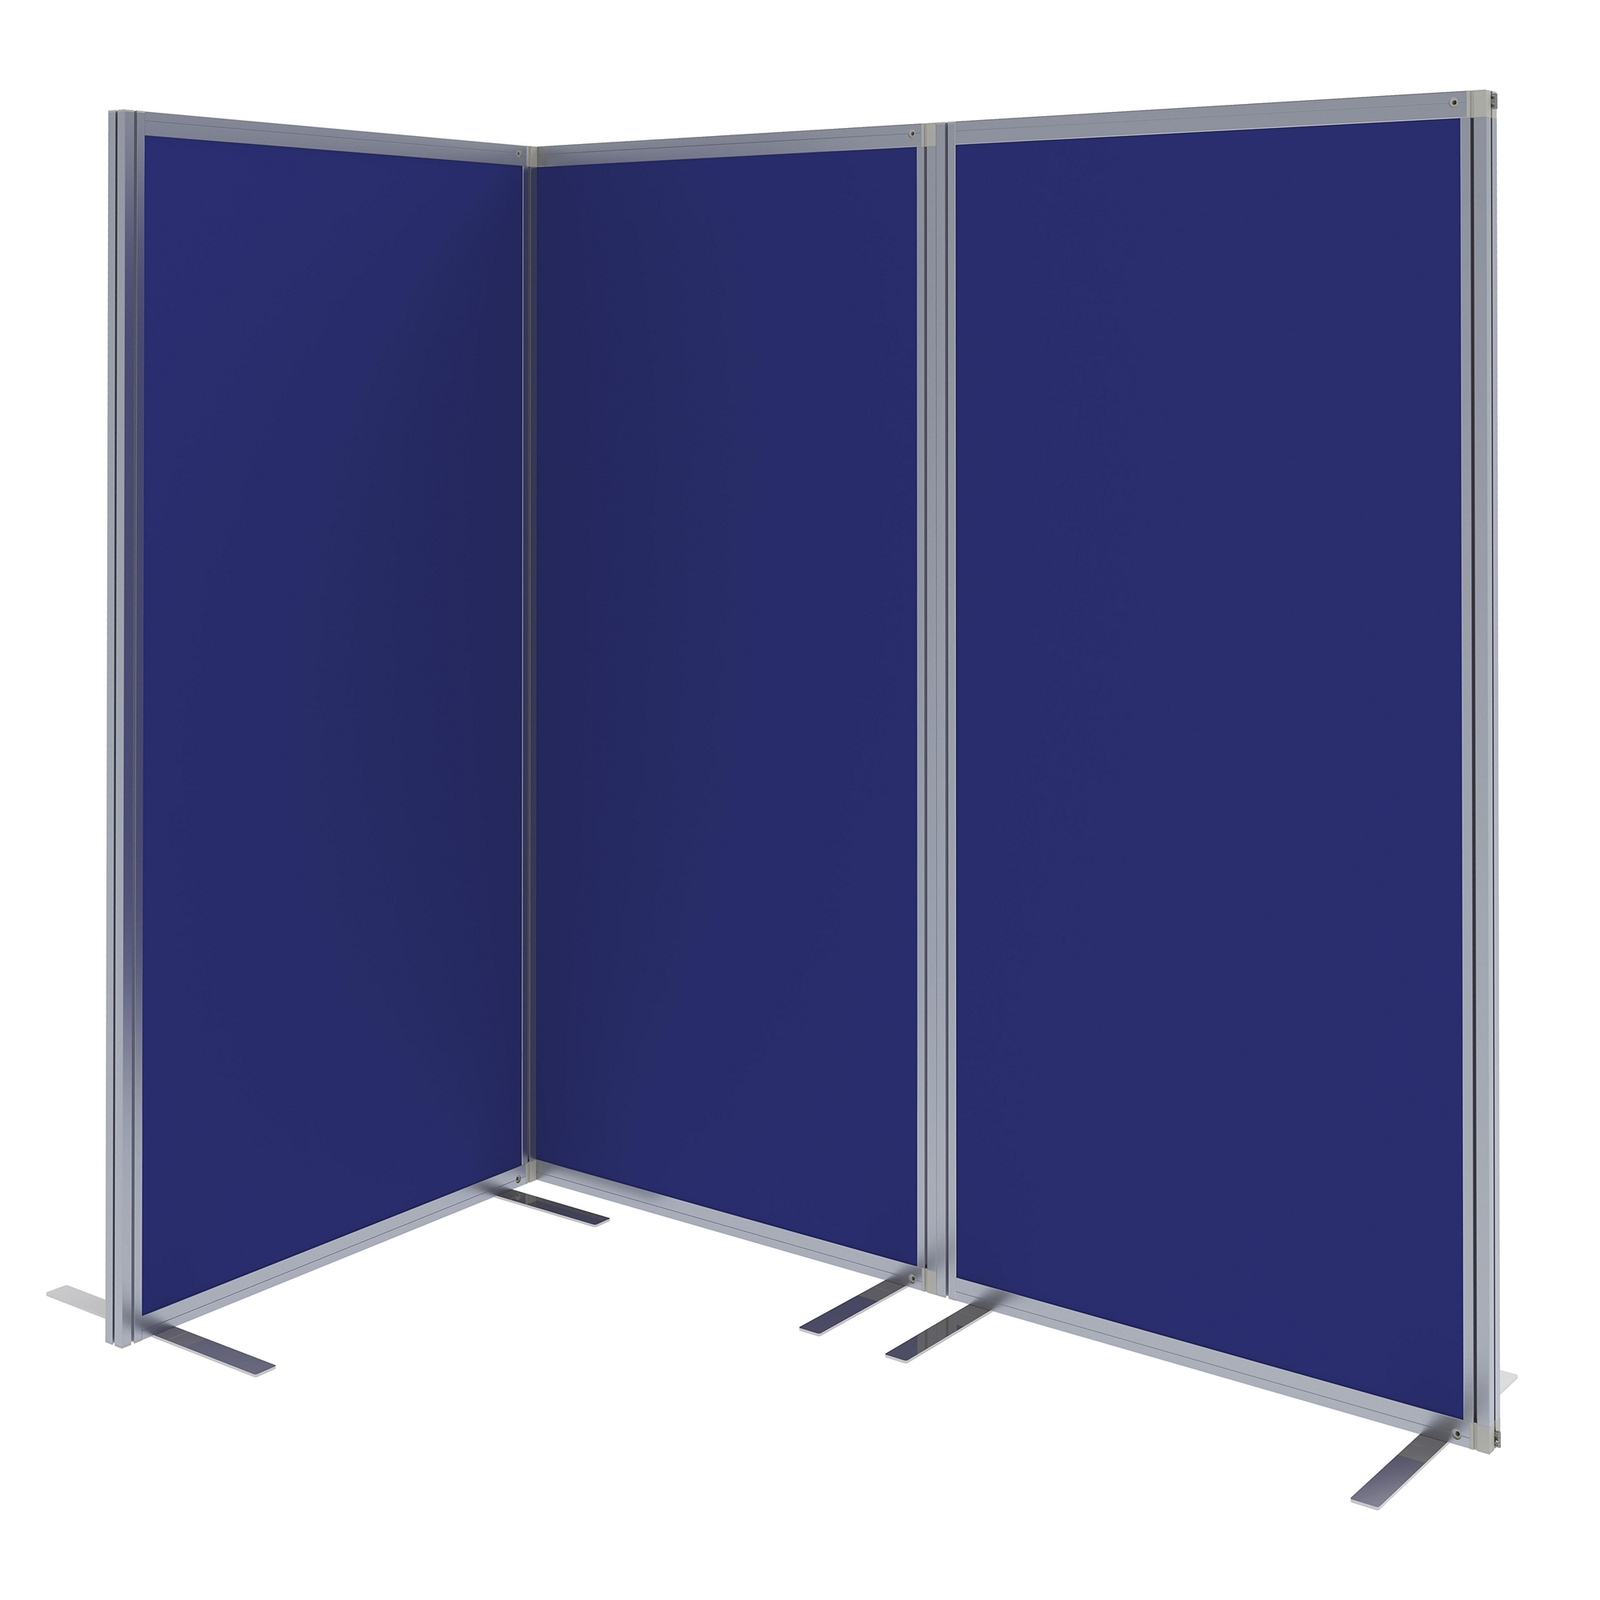 3 Panel Gallery Display System - 270x180